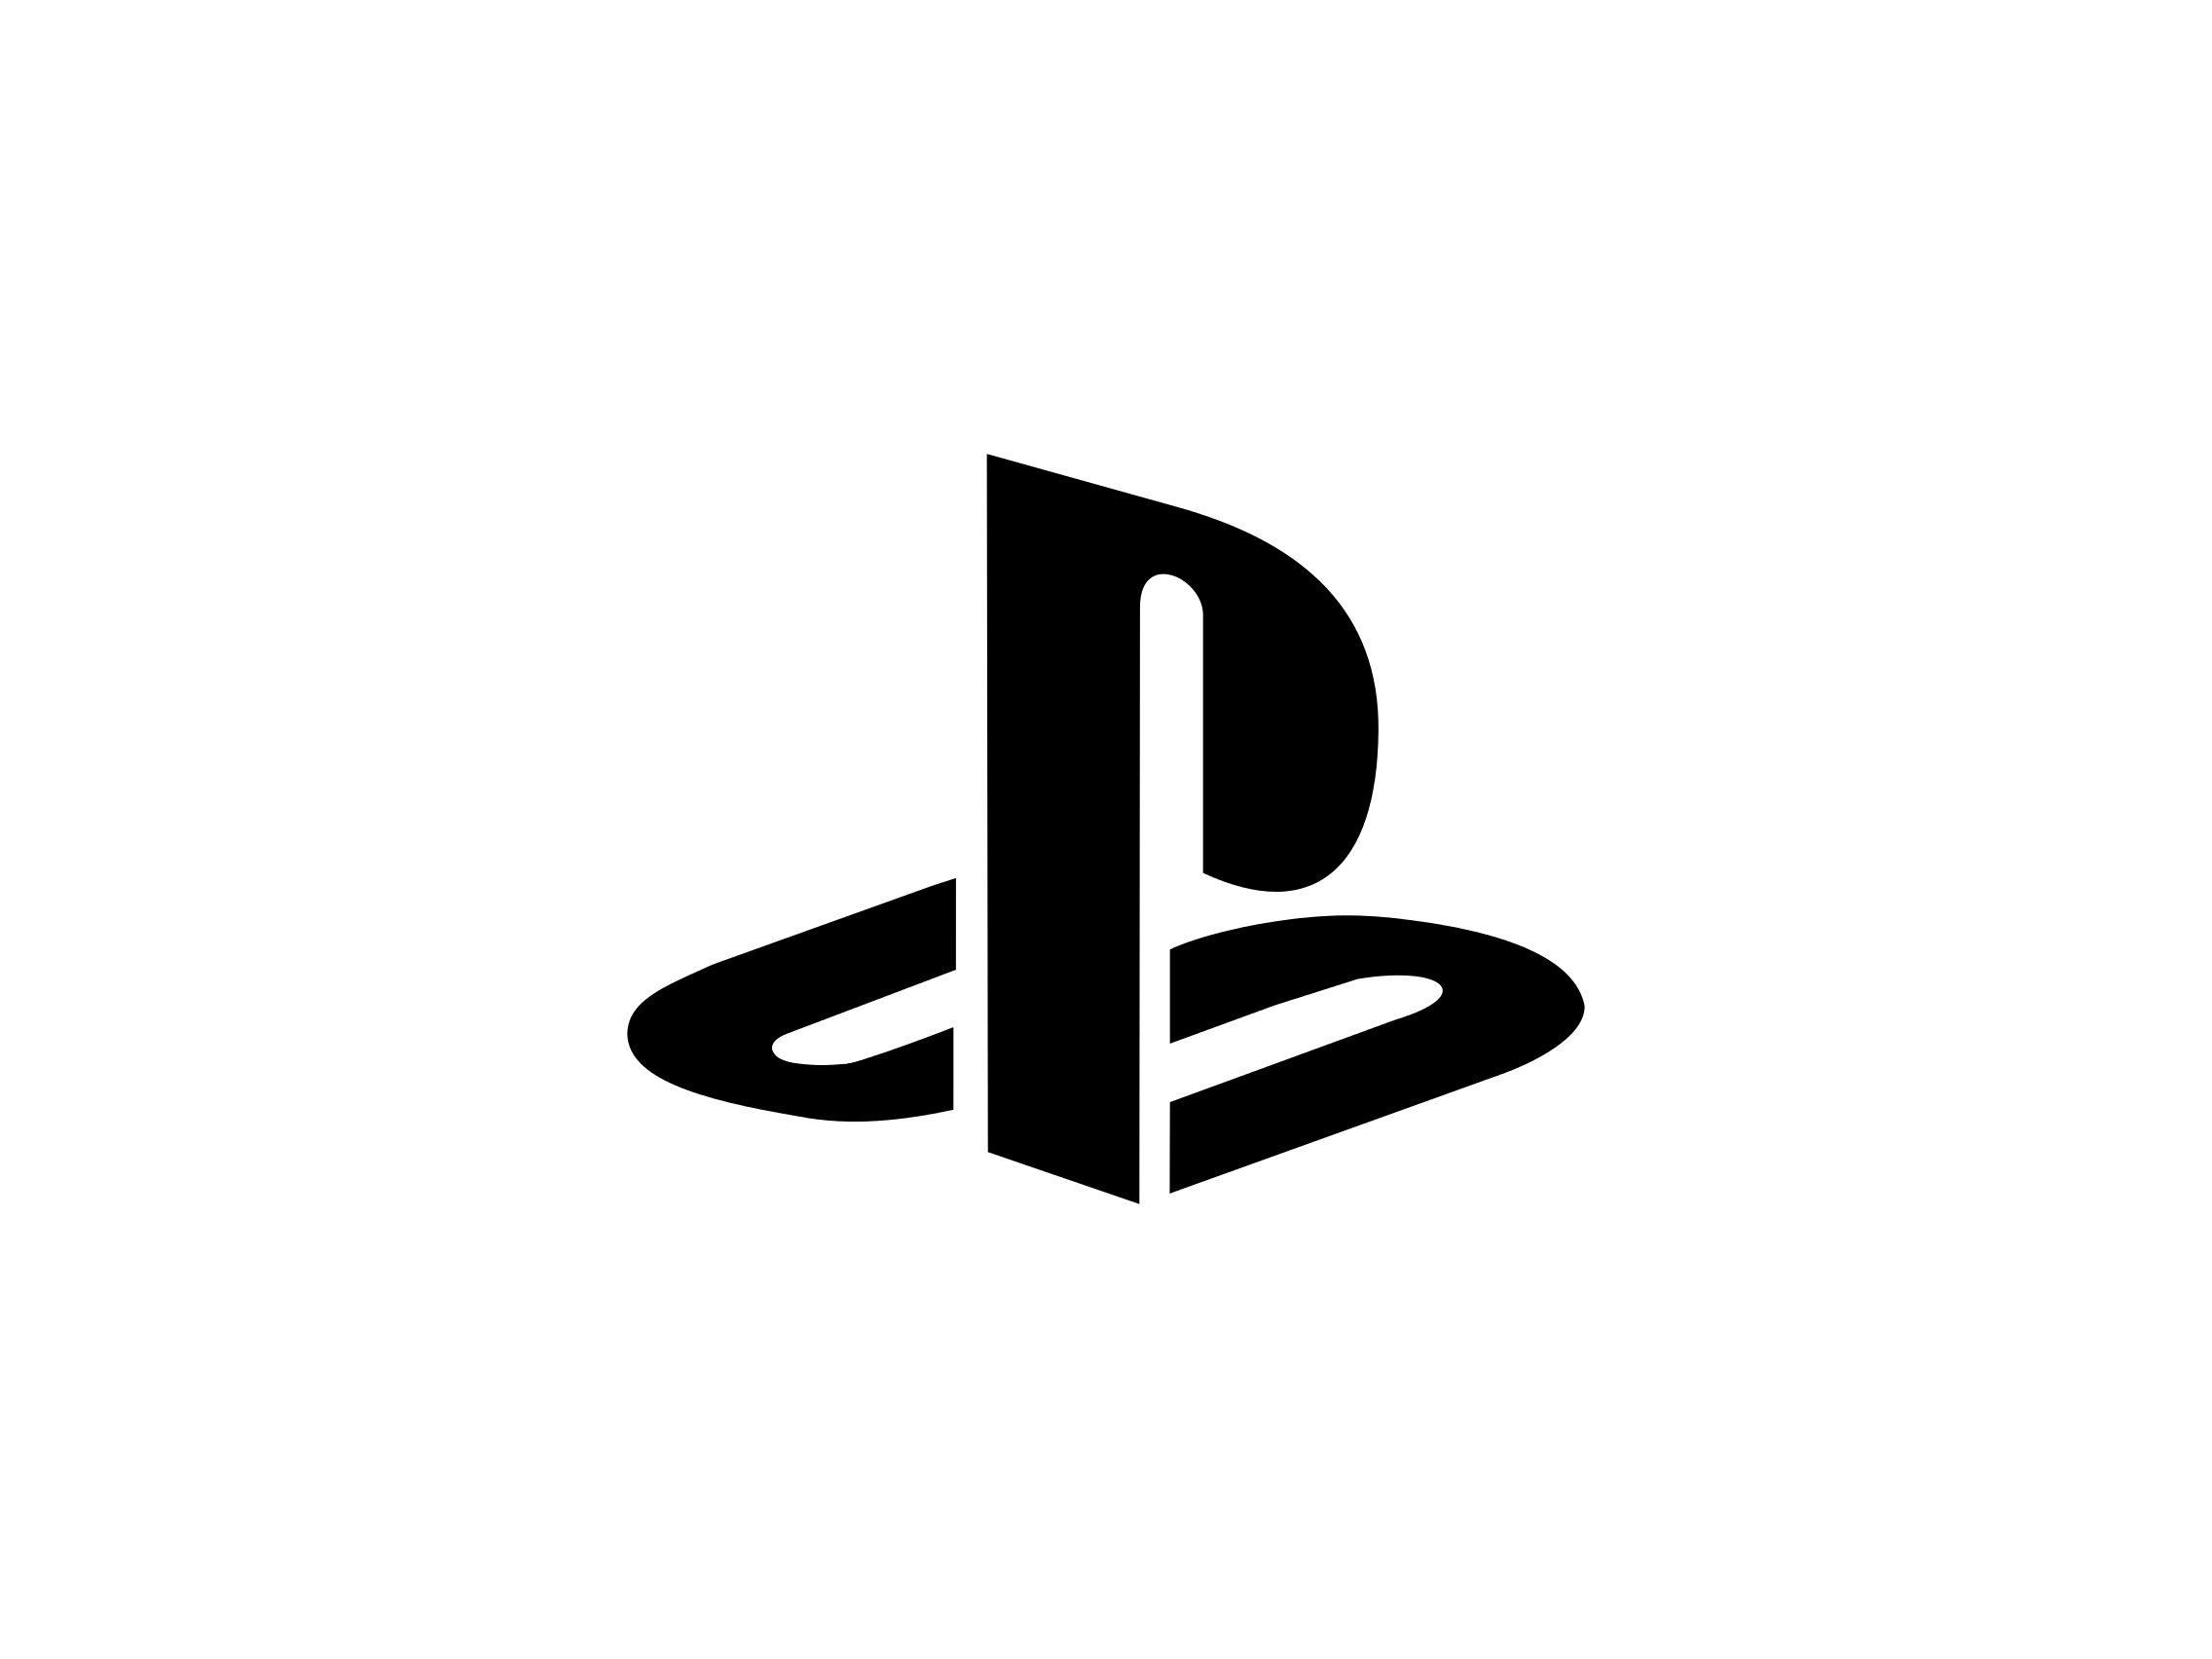 Sony PlayStation Logo - The iconic PlayStation logo was created in 1994 by Japanese designer ...